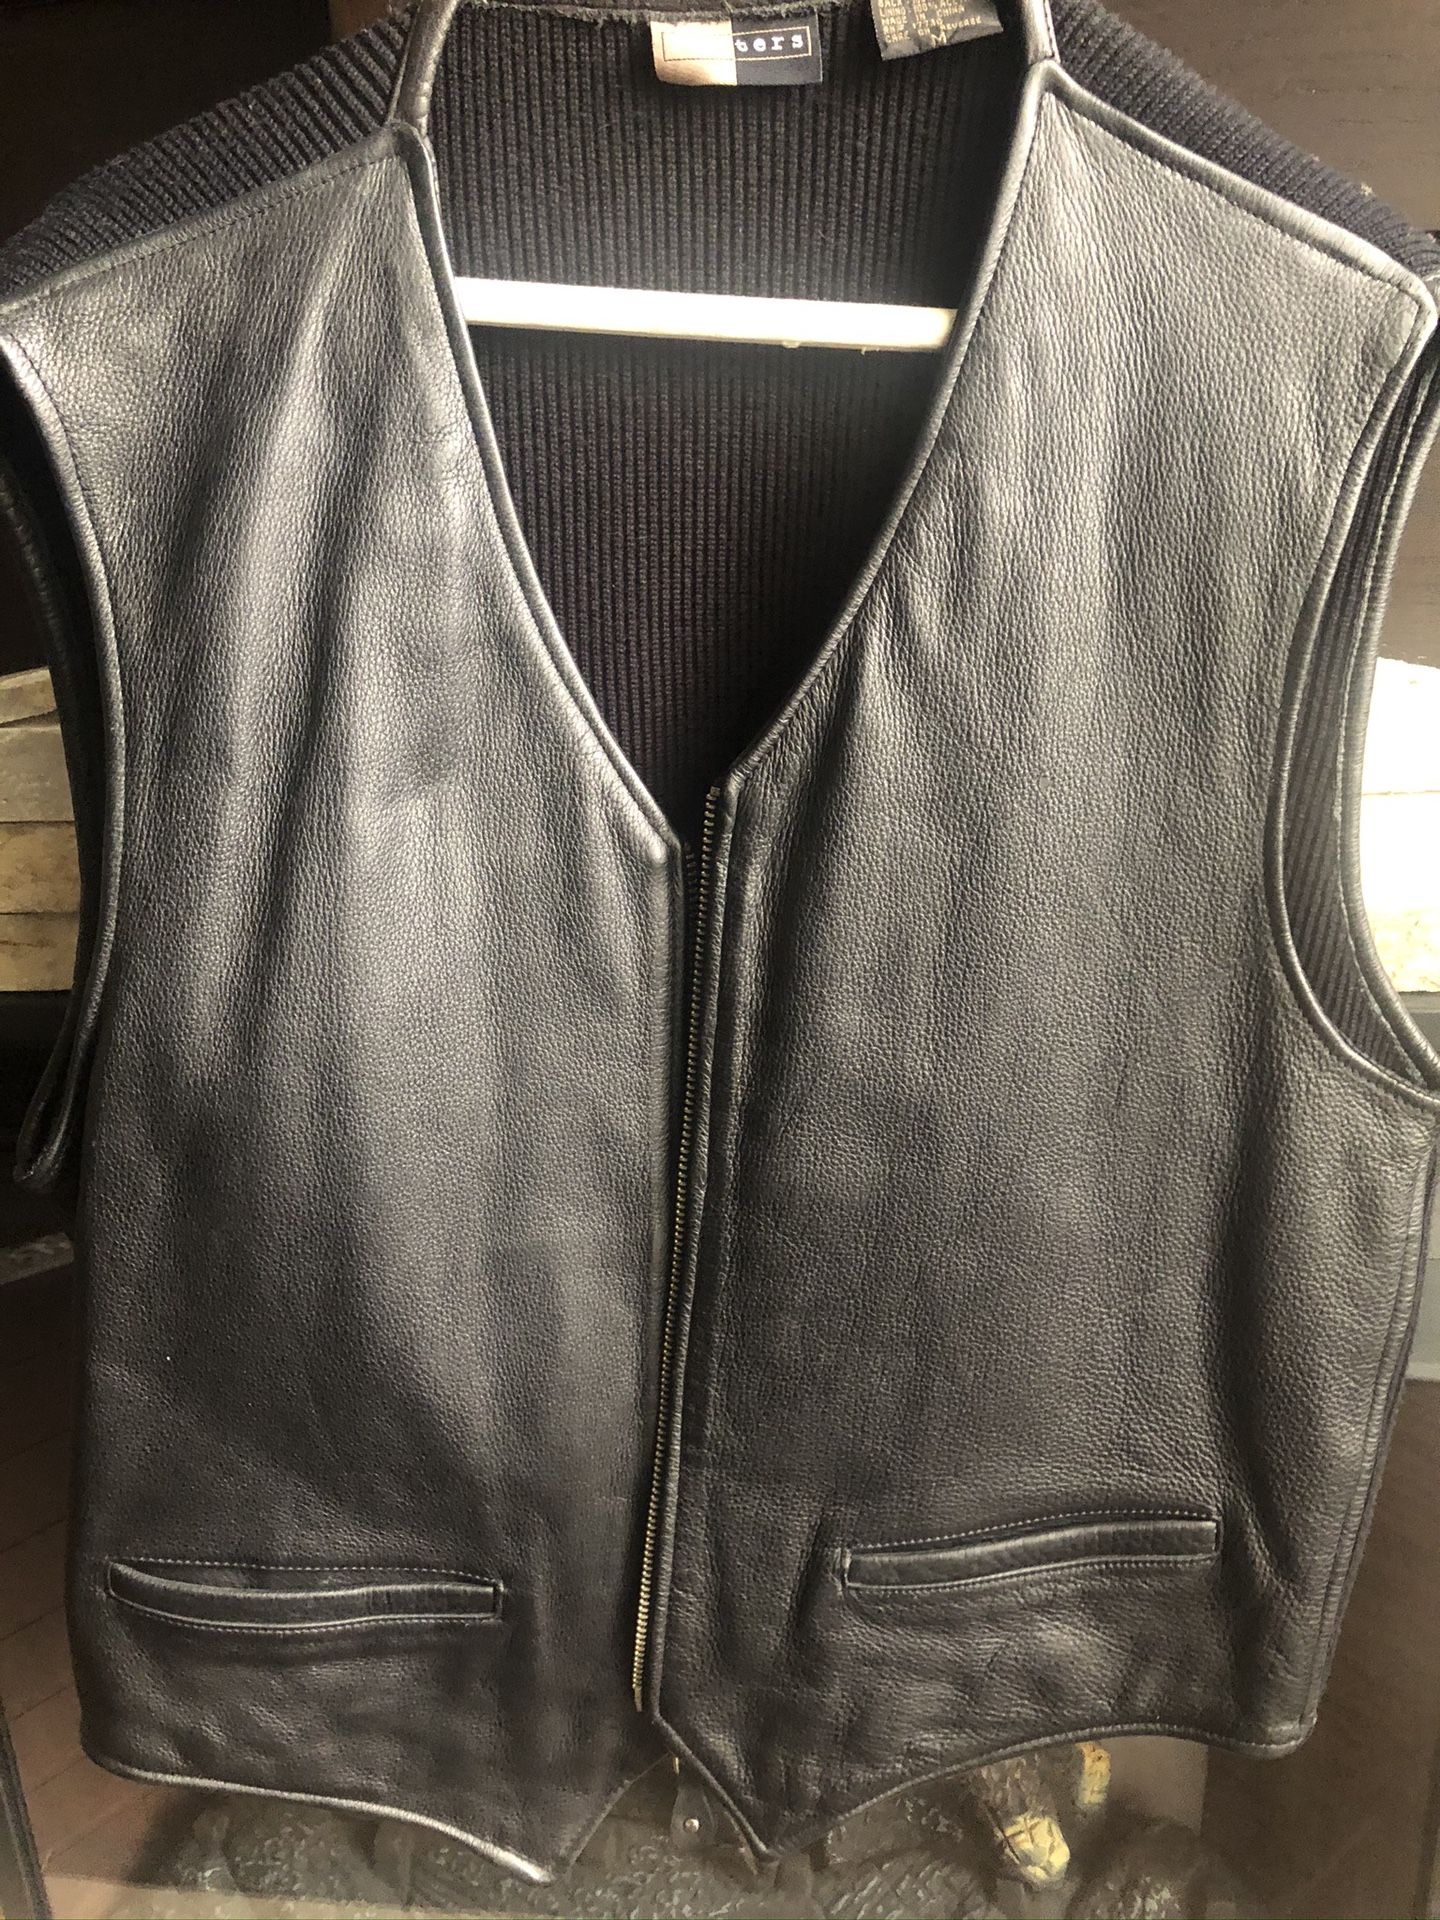 Leather sweater vest (excellent condition)